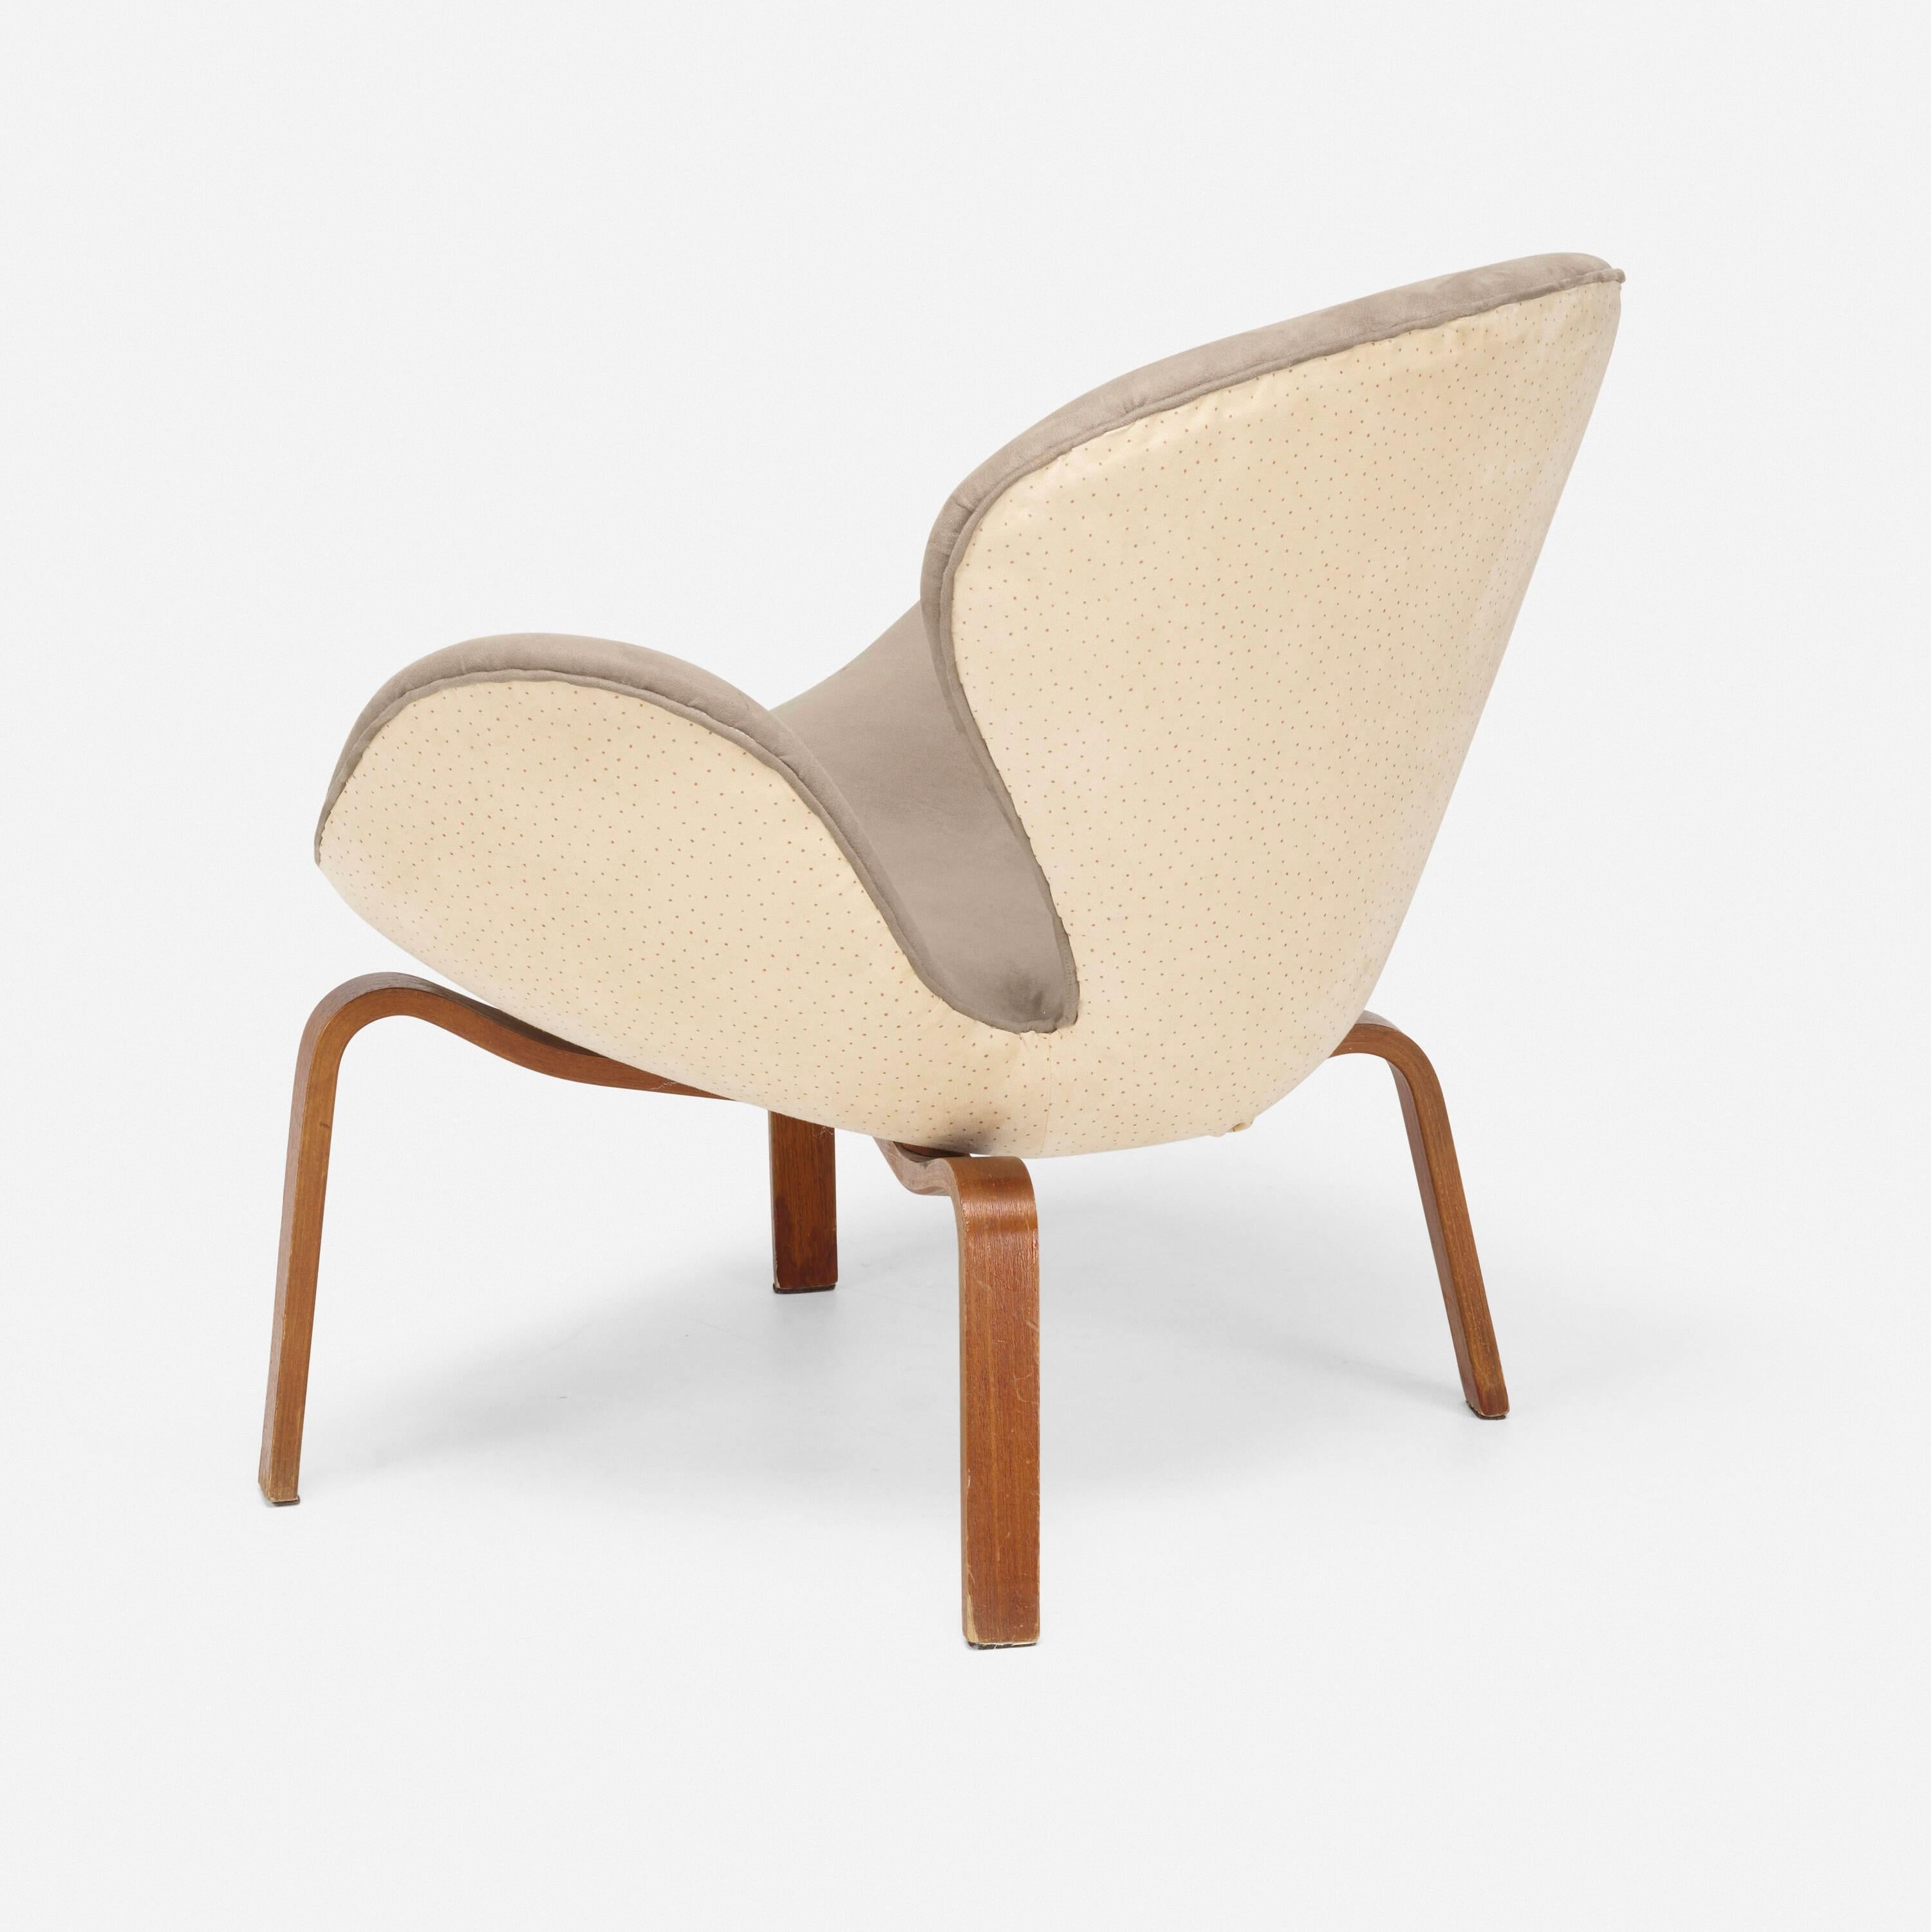 Mid-Century Modern Early 'Swan' Chair Model No. 4325 by Arne Jacobson